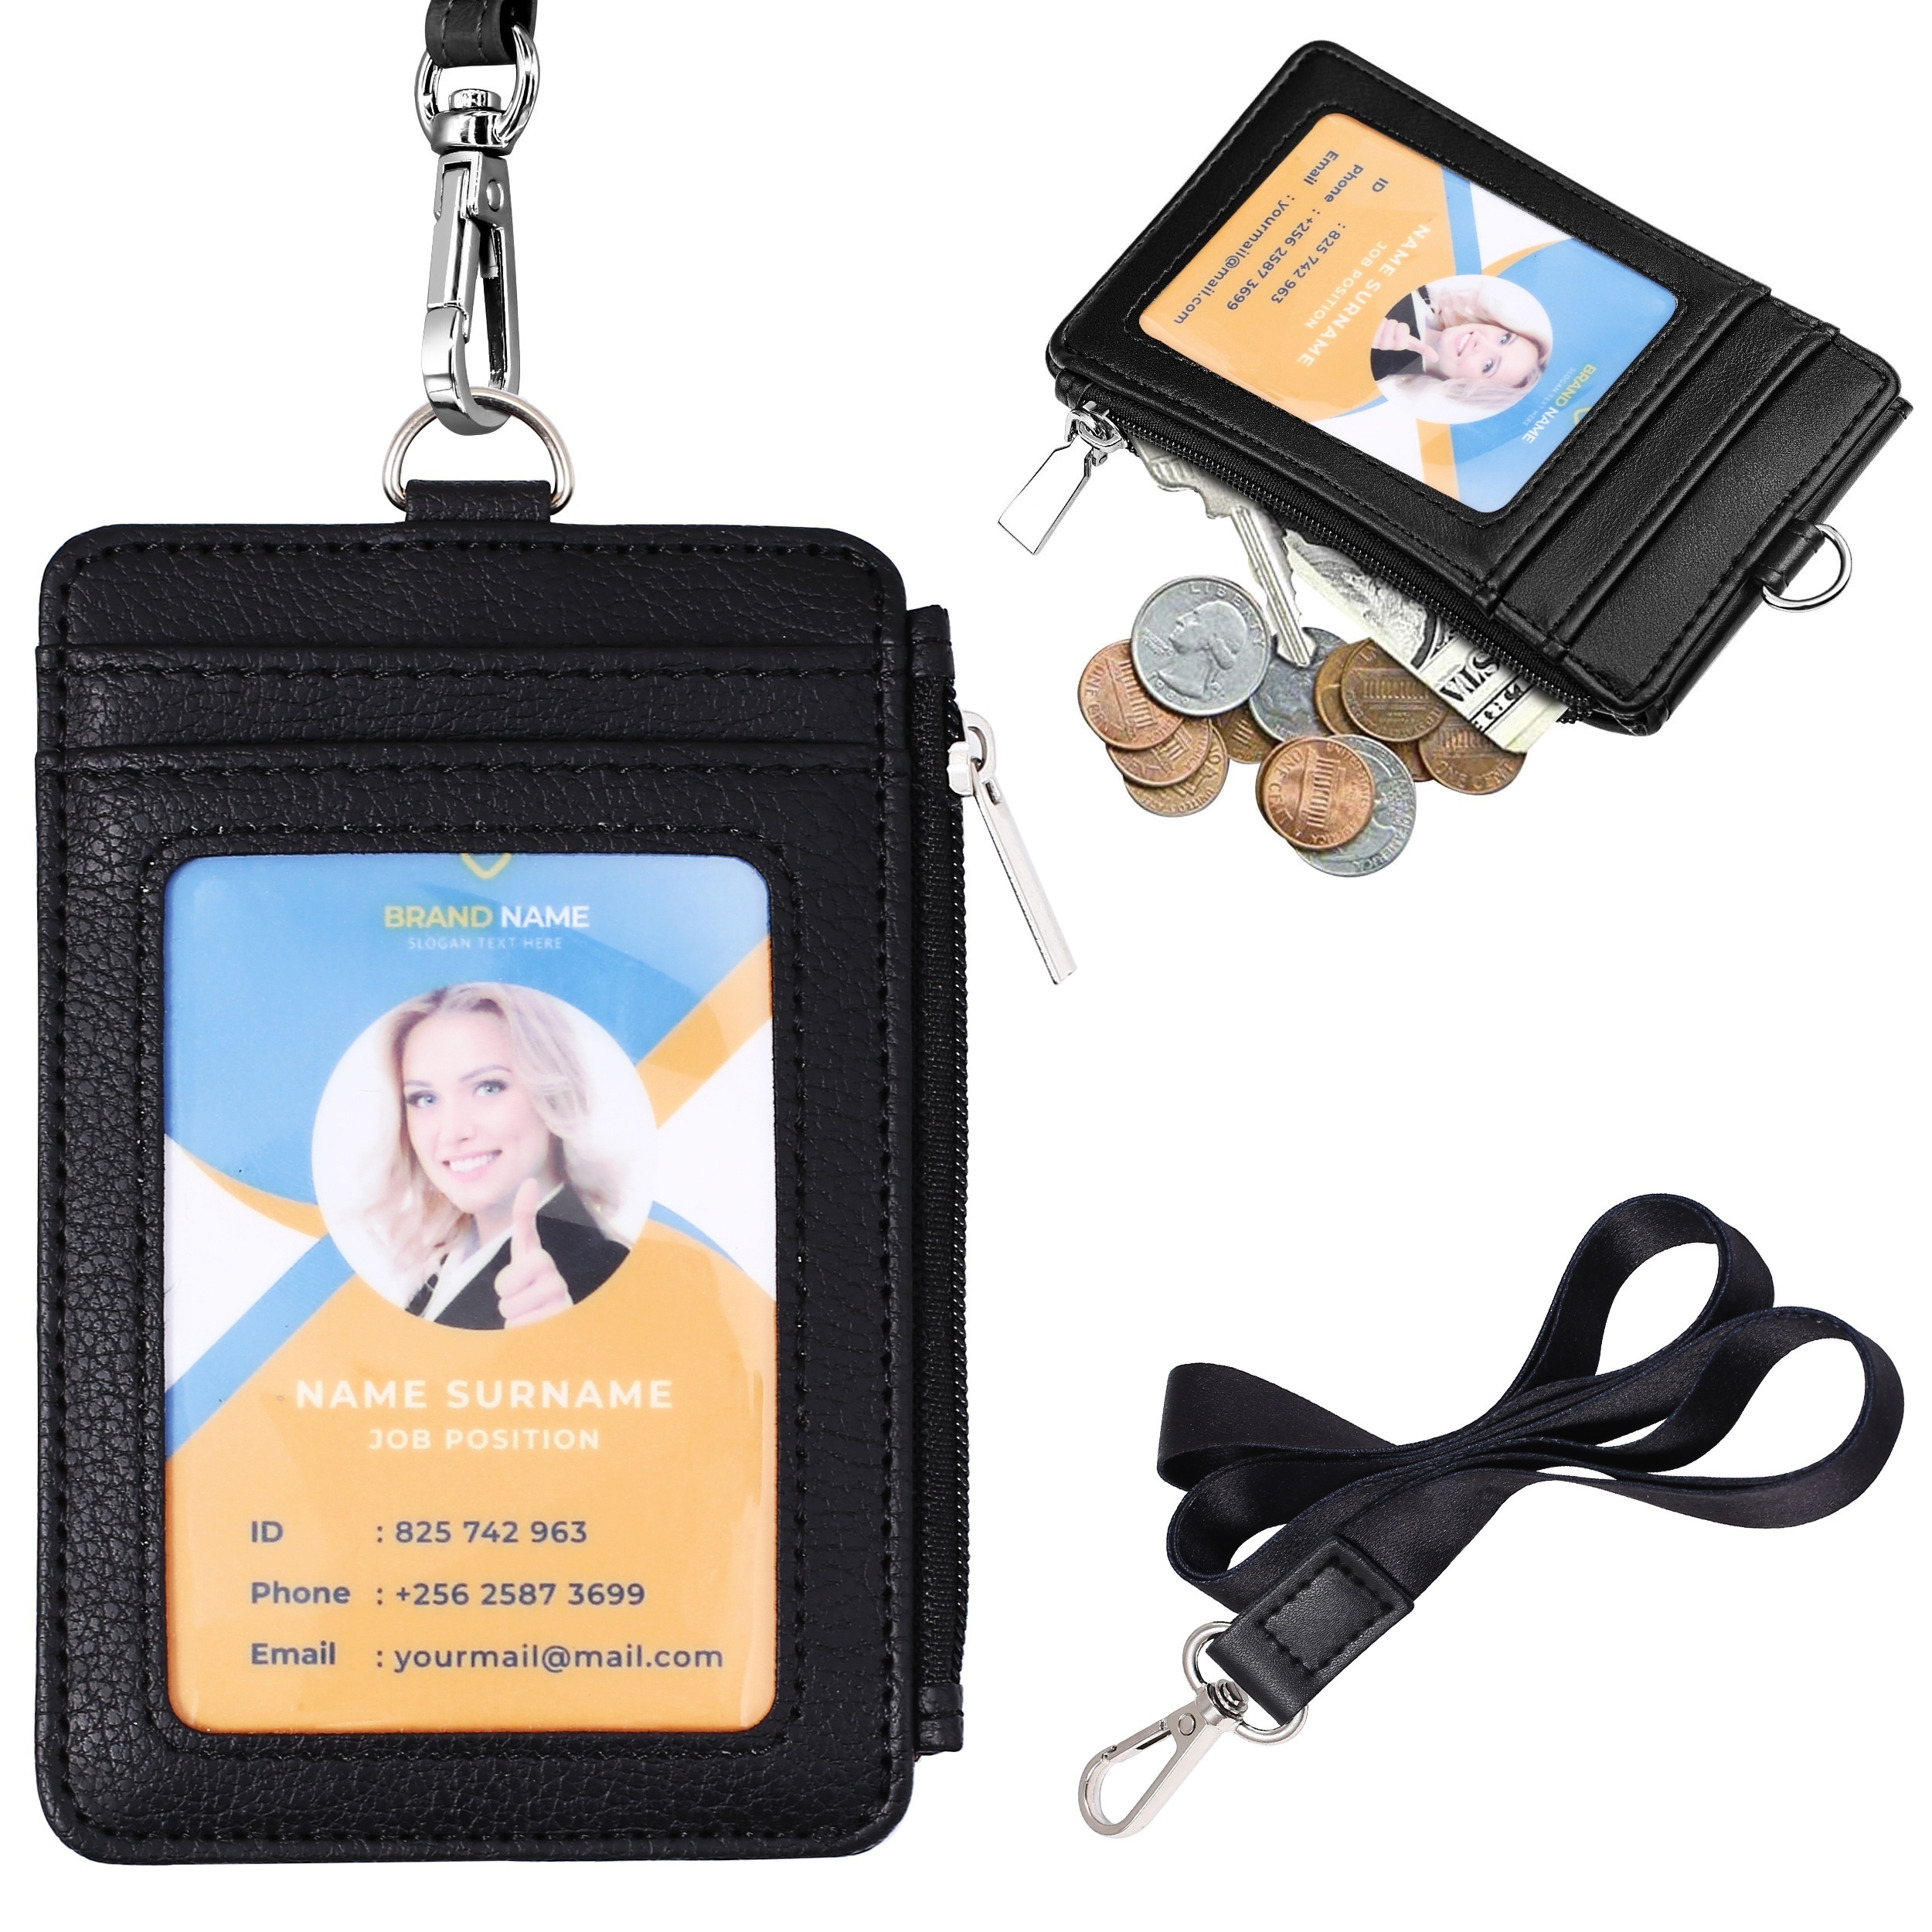 ID Badge Holder with Retractable Lanyard, 4 Card Slots, Premium PU Leather ID Card Holder with Zipper Pocket, Easy Swipe ID Holder for Work ID, School